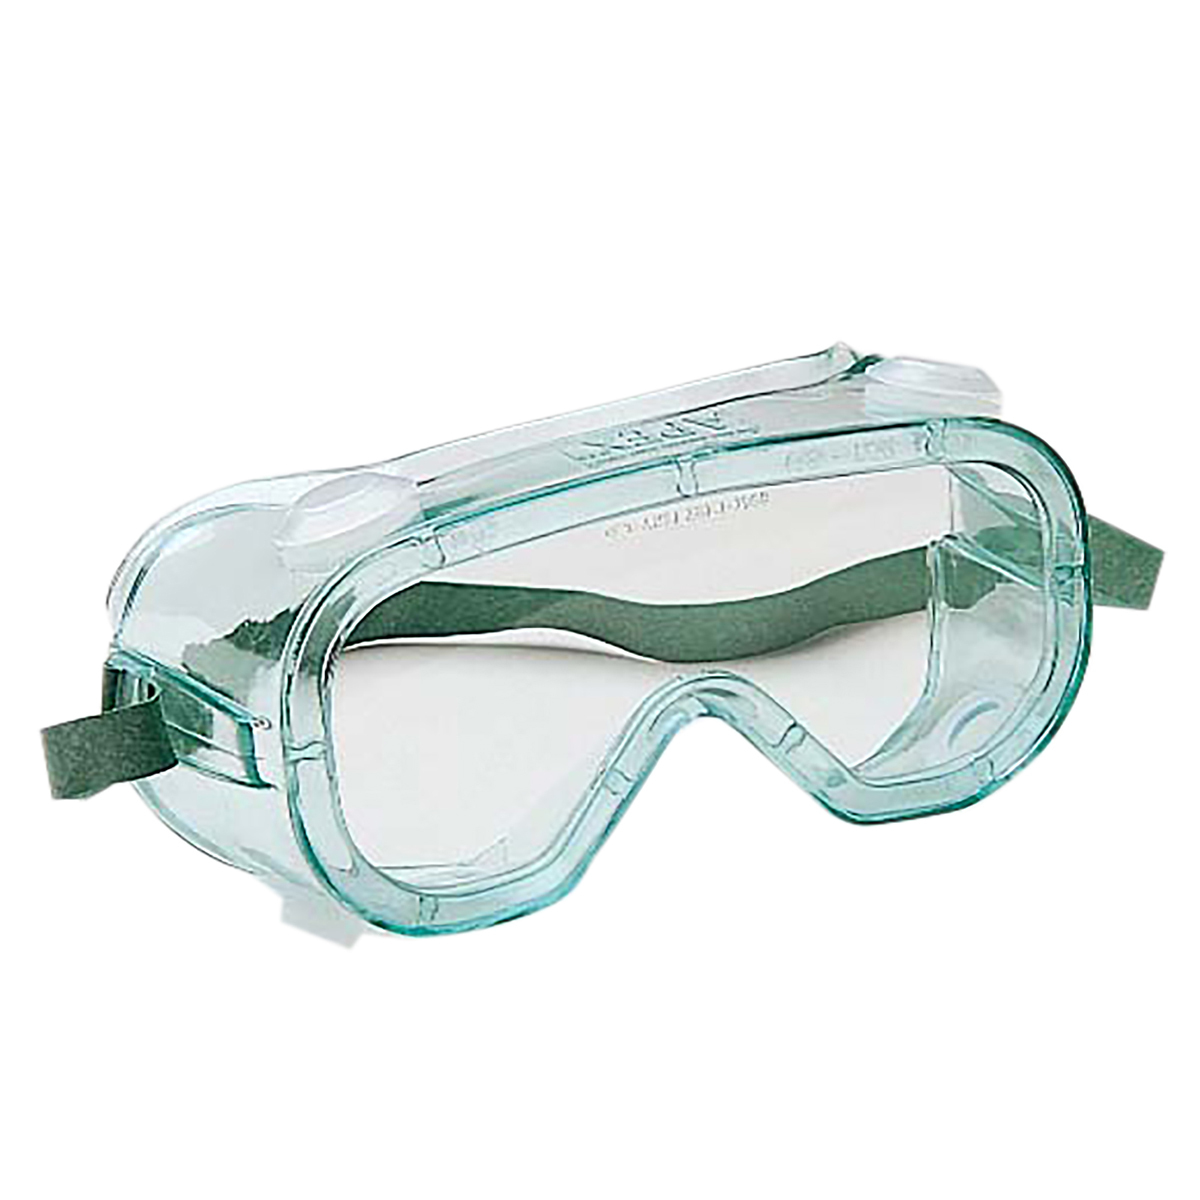 Kimberly-Clark Professional* KleenGuard™ SG34 Splash Goggles With Green And Clear Hard Coat Lens (Availability restrictions appl